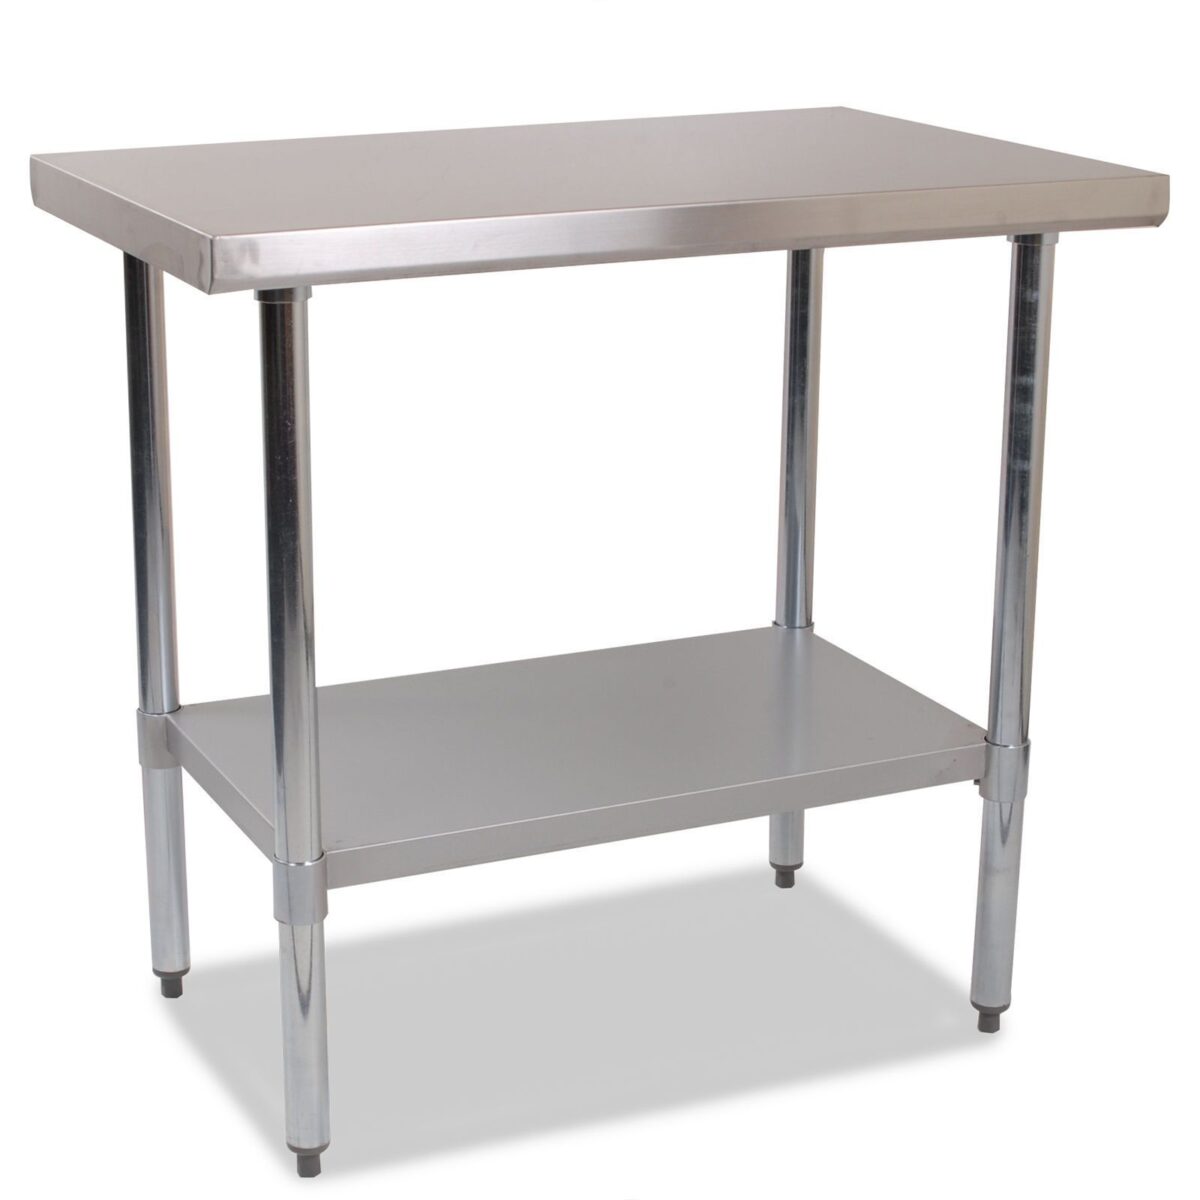 900mm Wide Stainless Steel Centre Prep Table – RSSCT-90